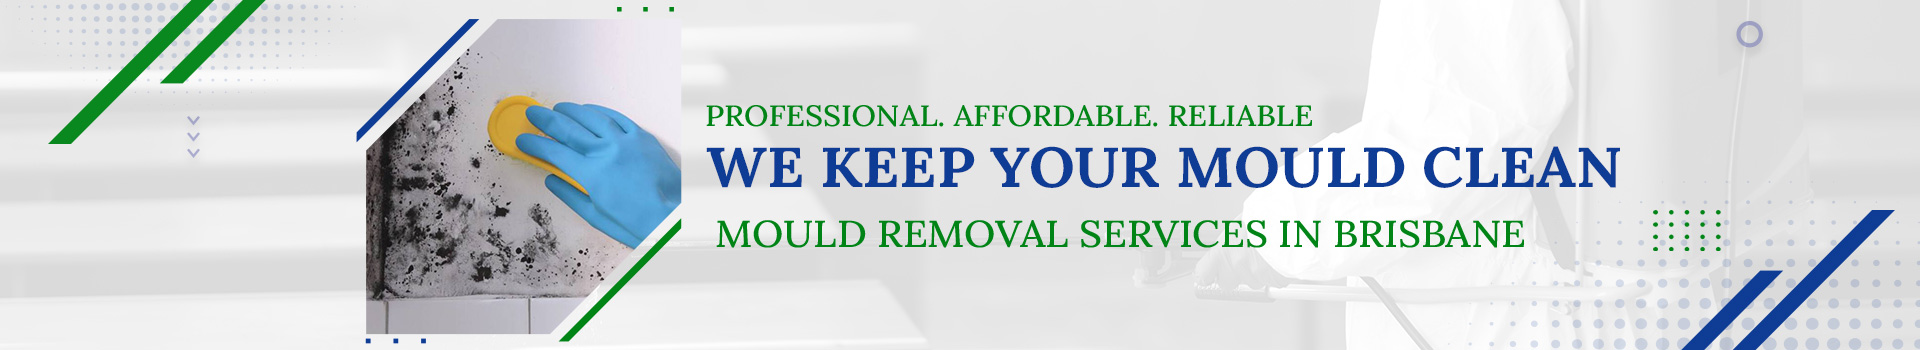 Mould Removal services in Brisbane